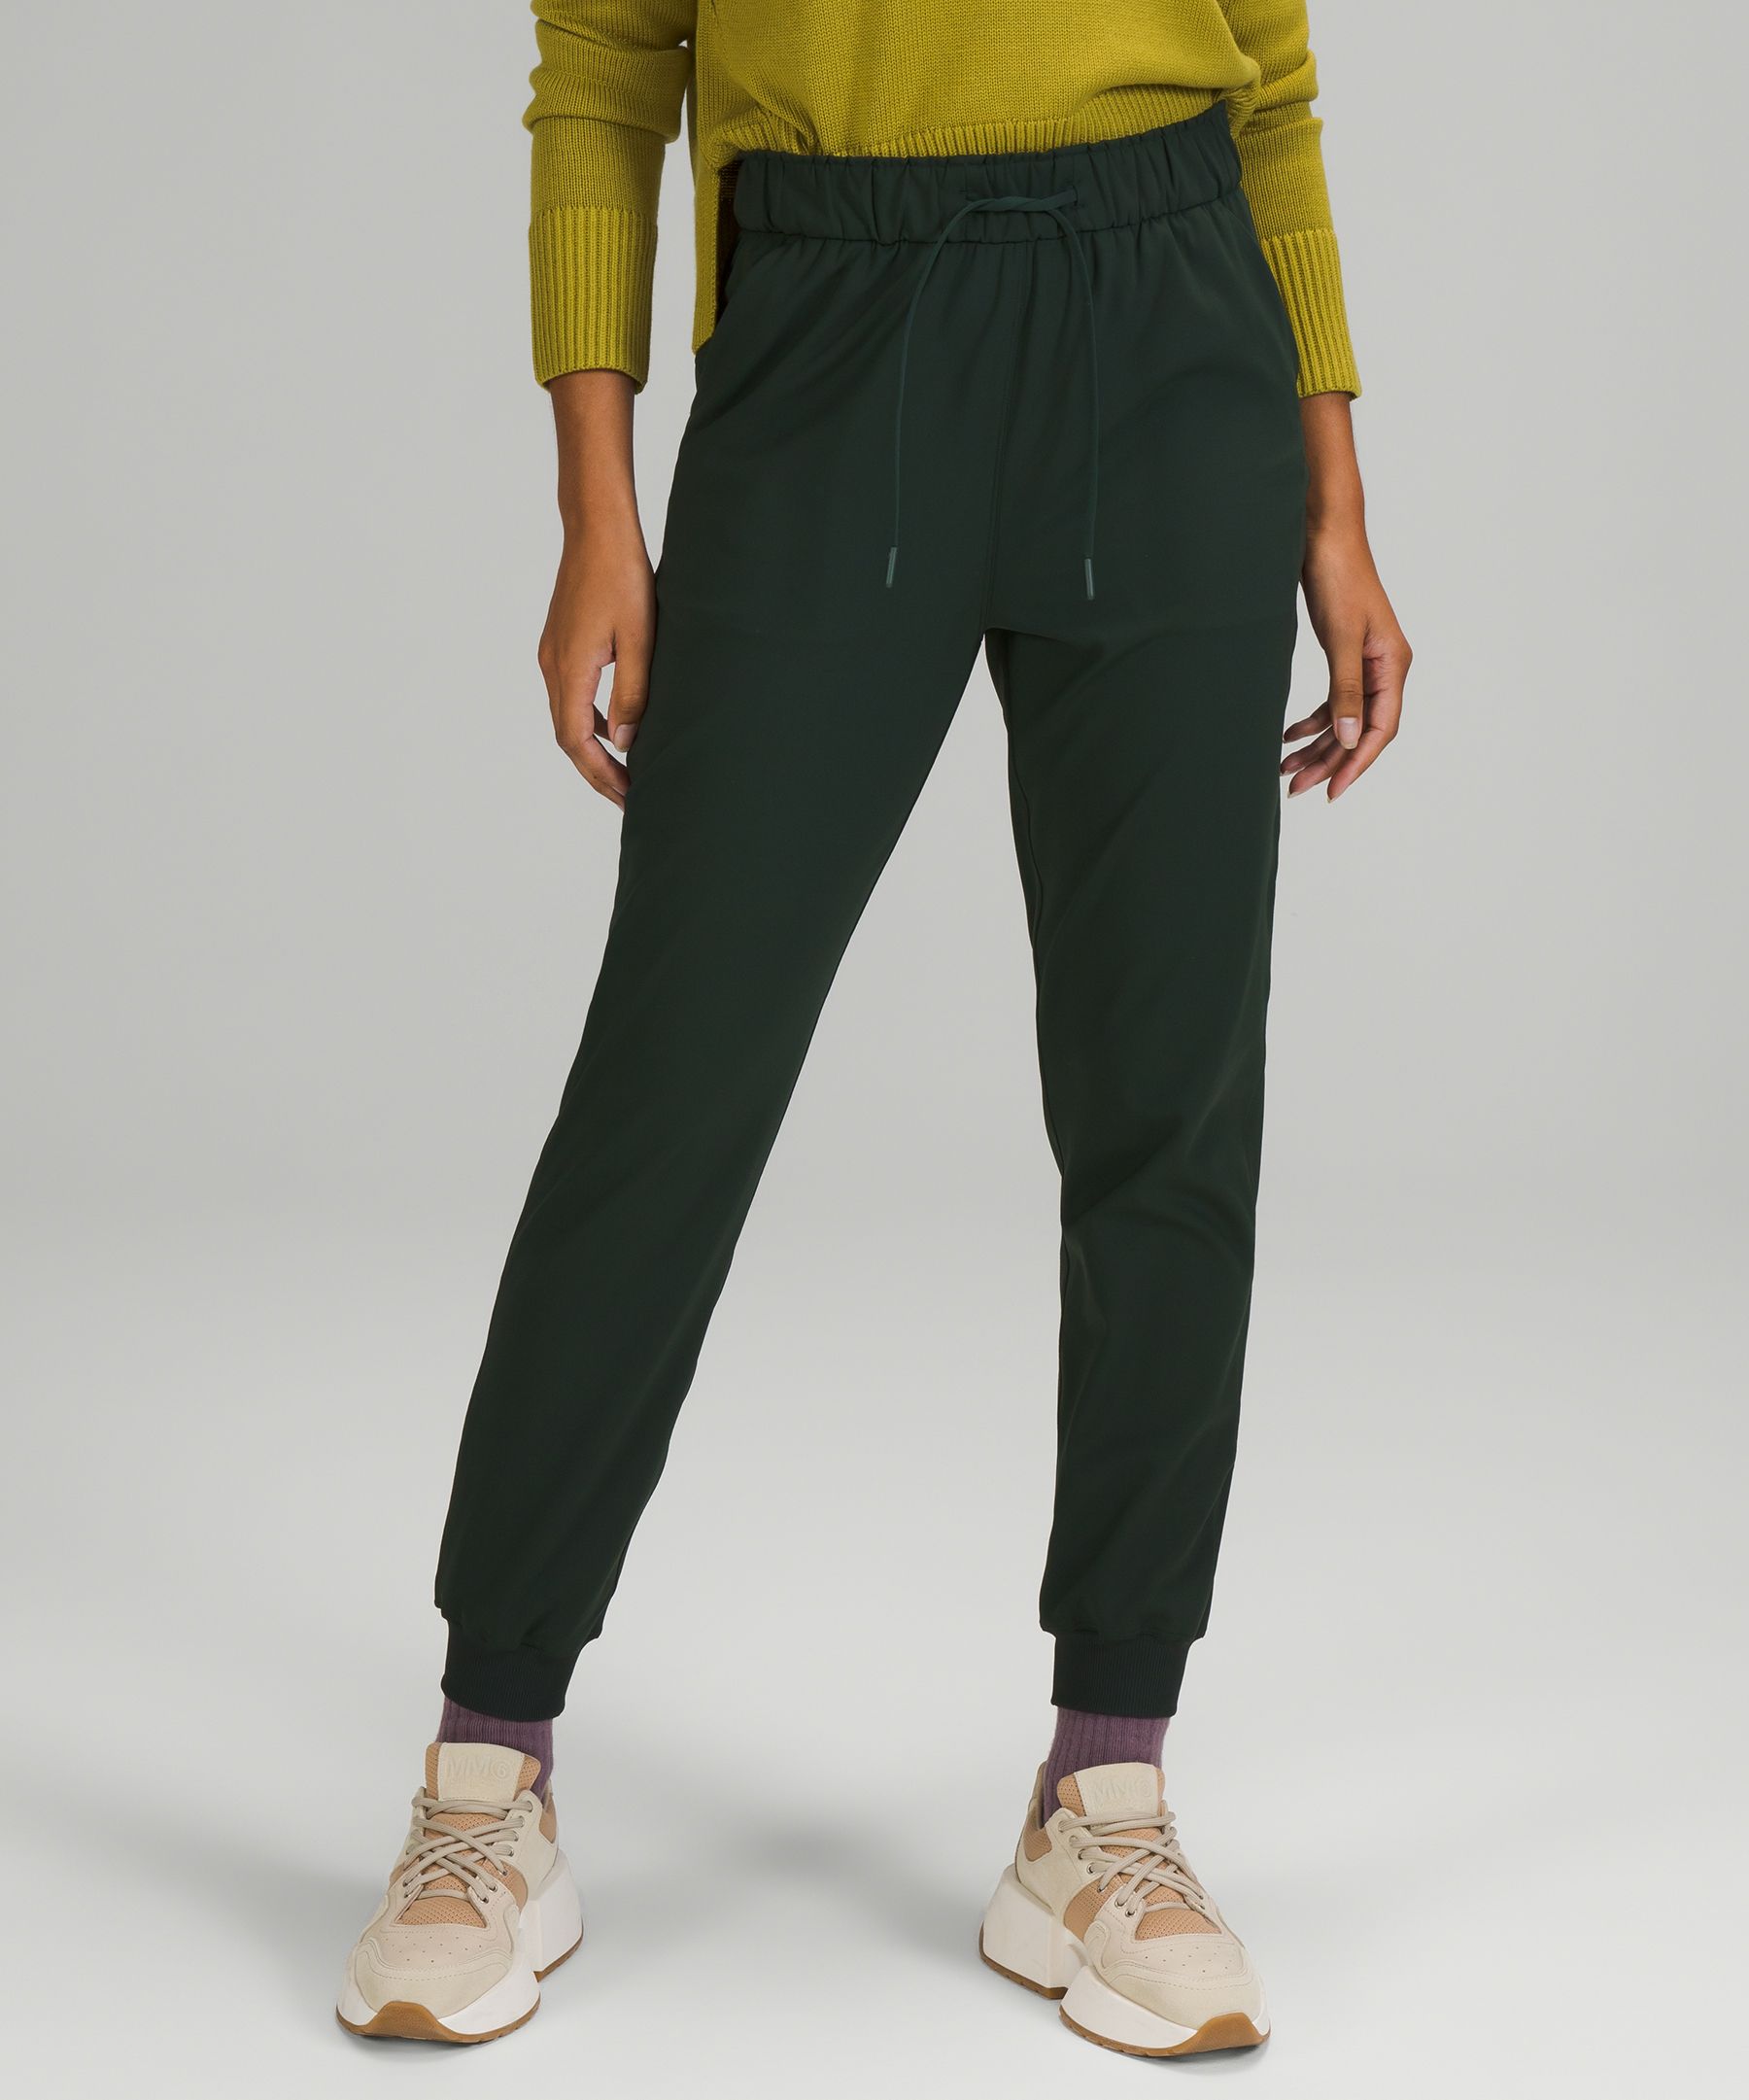 Lululemon Stretch Luxtreme High-rise Joggers In Rainforest Green